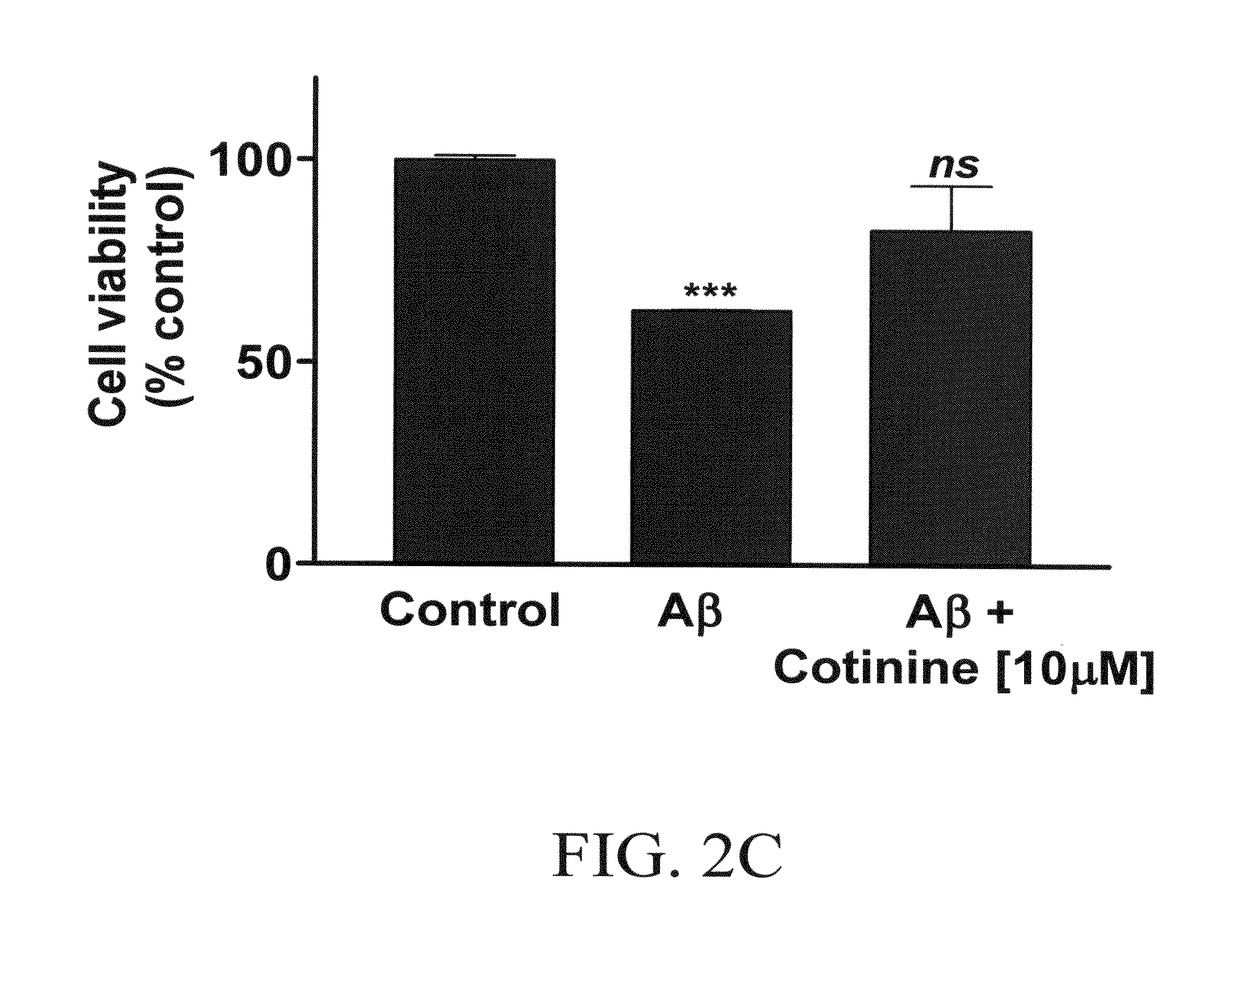 Materials and methods for diagnosis, prevention and/or treatment of stress disorders and conditions associated with abeta peptide aggregation